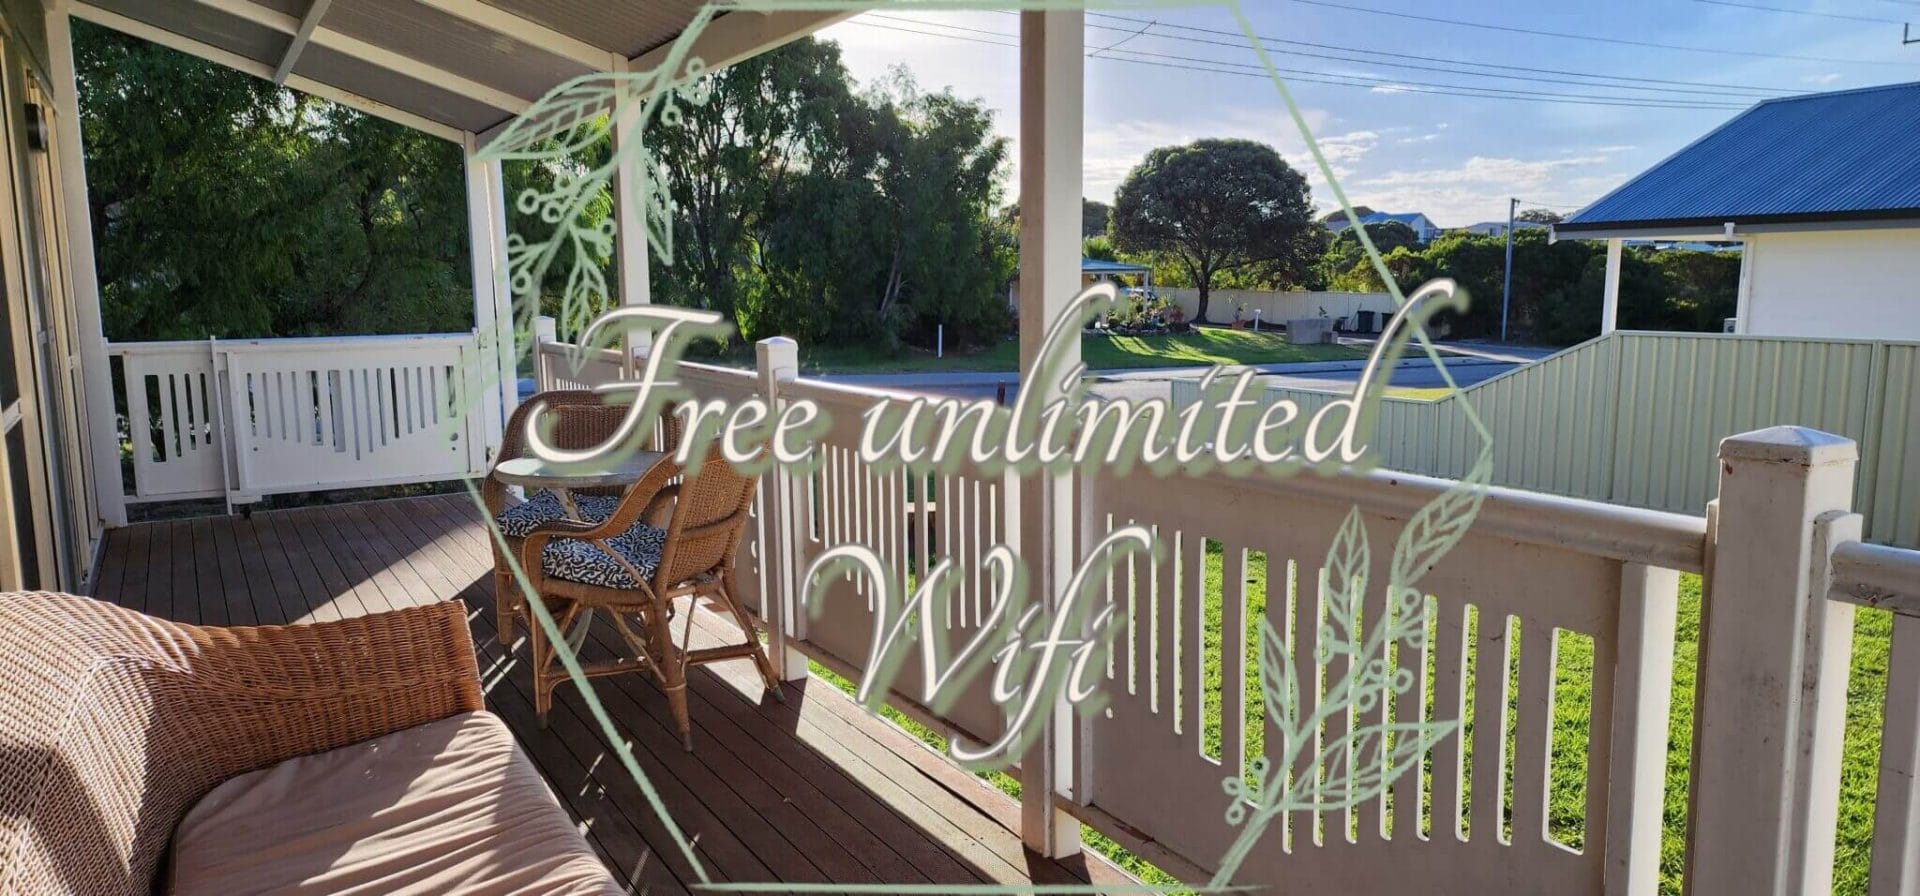 The Bay Cottage - Accommodation in Bremer Bay - 9 Roderick Street - FREE Unlimited WIFI